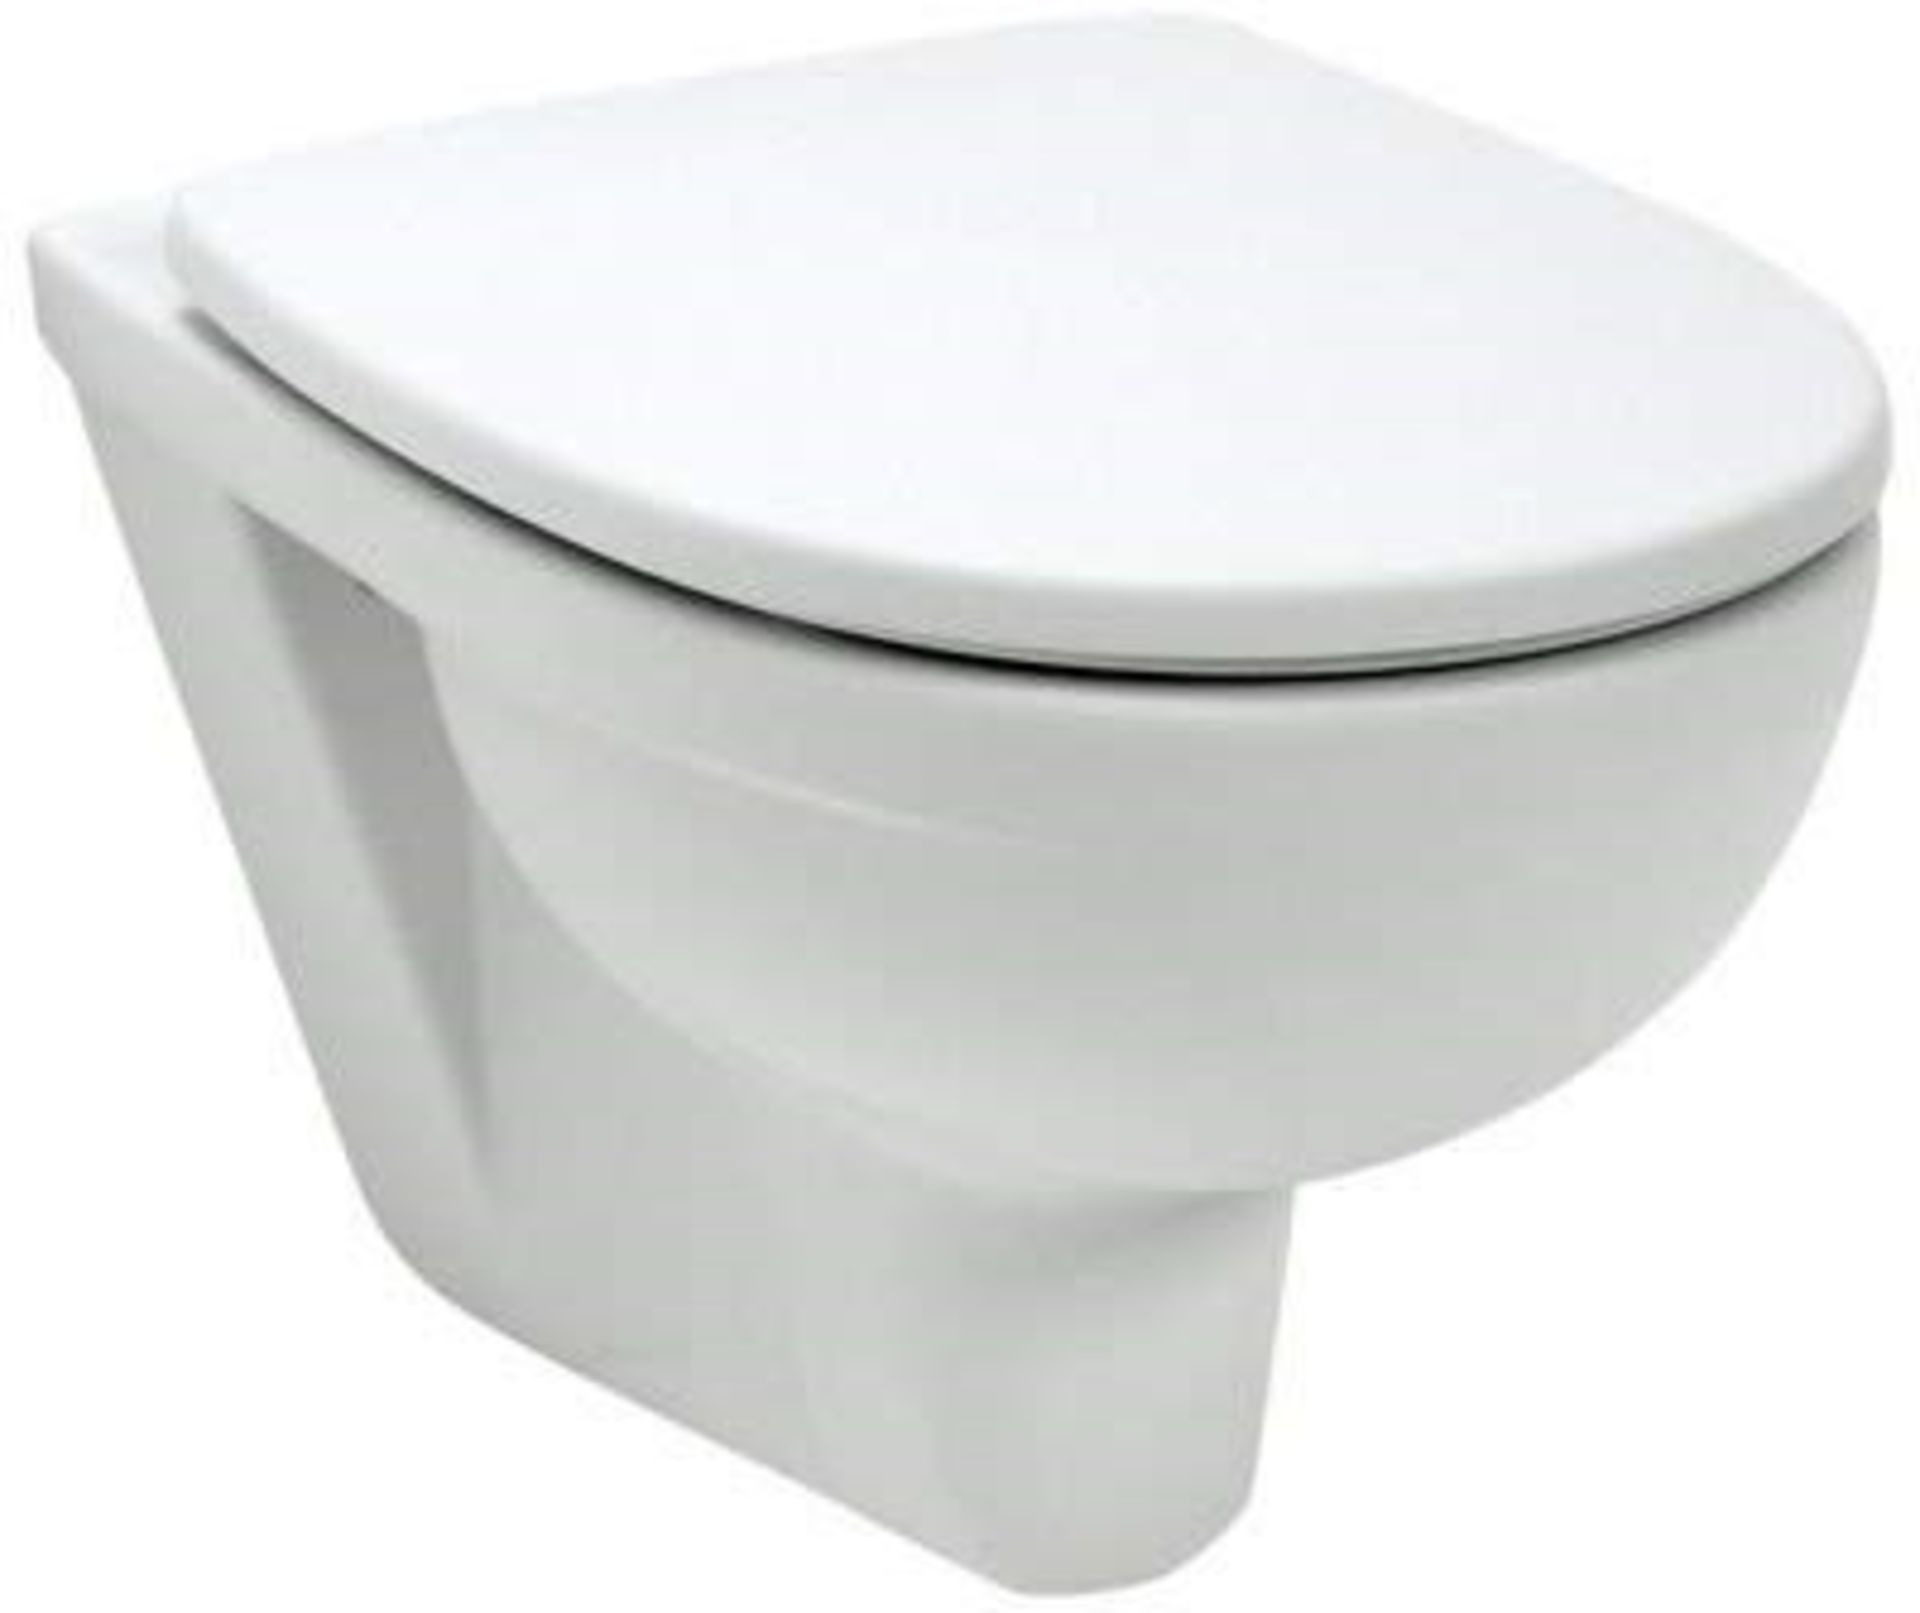 Brand New Twyford White Refresh Back to Wall Toilet, Floor Mounted Refresh Back to Wall Toilet.Seat - Image 2 of 2